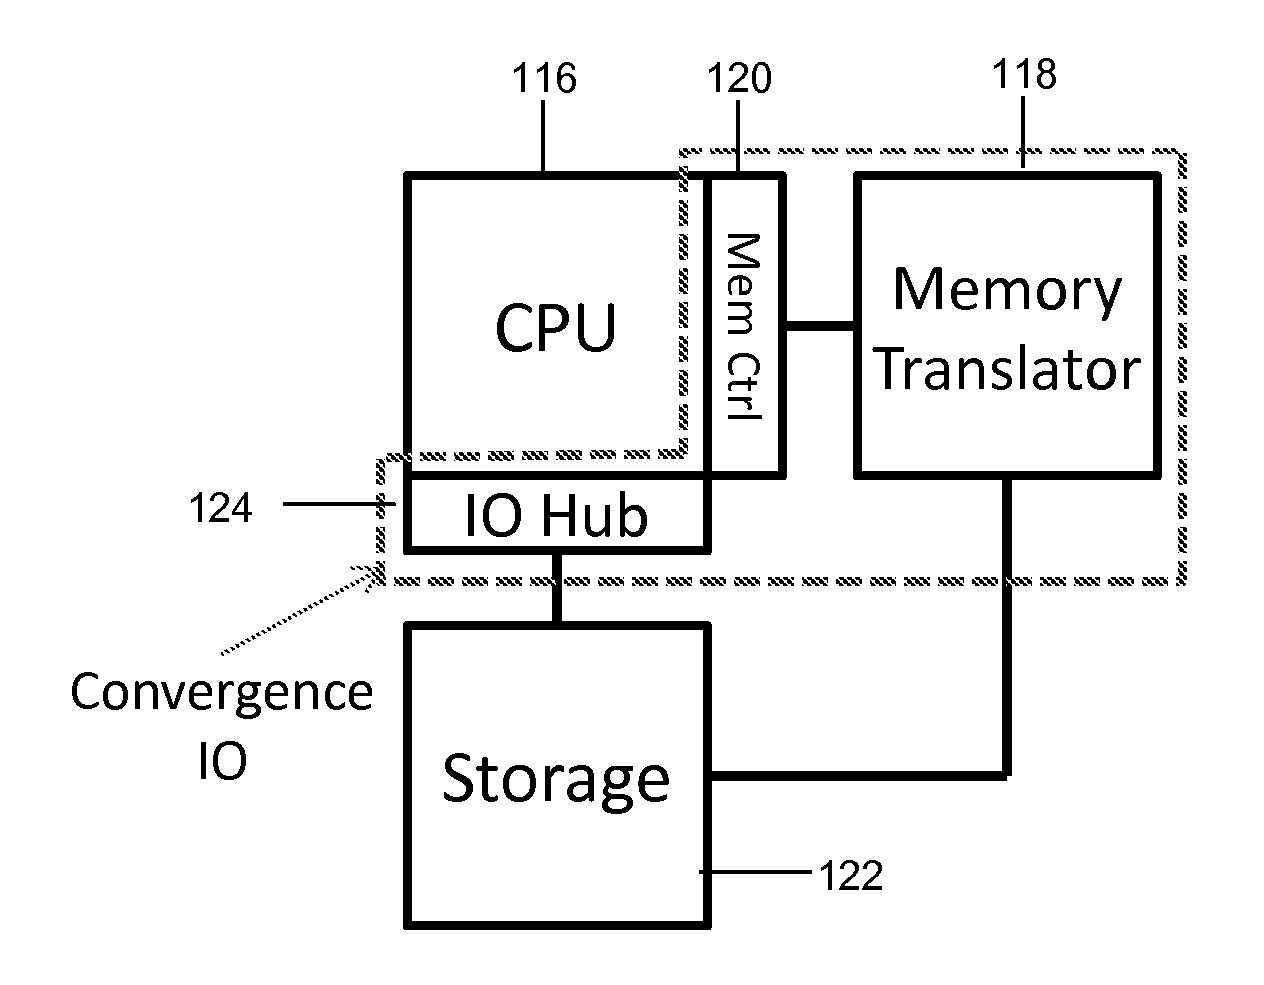 Central processing unit (CPU) architecture and hybrid memory storage system